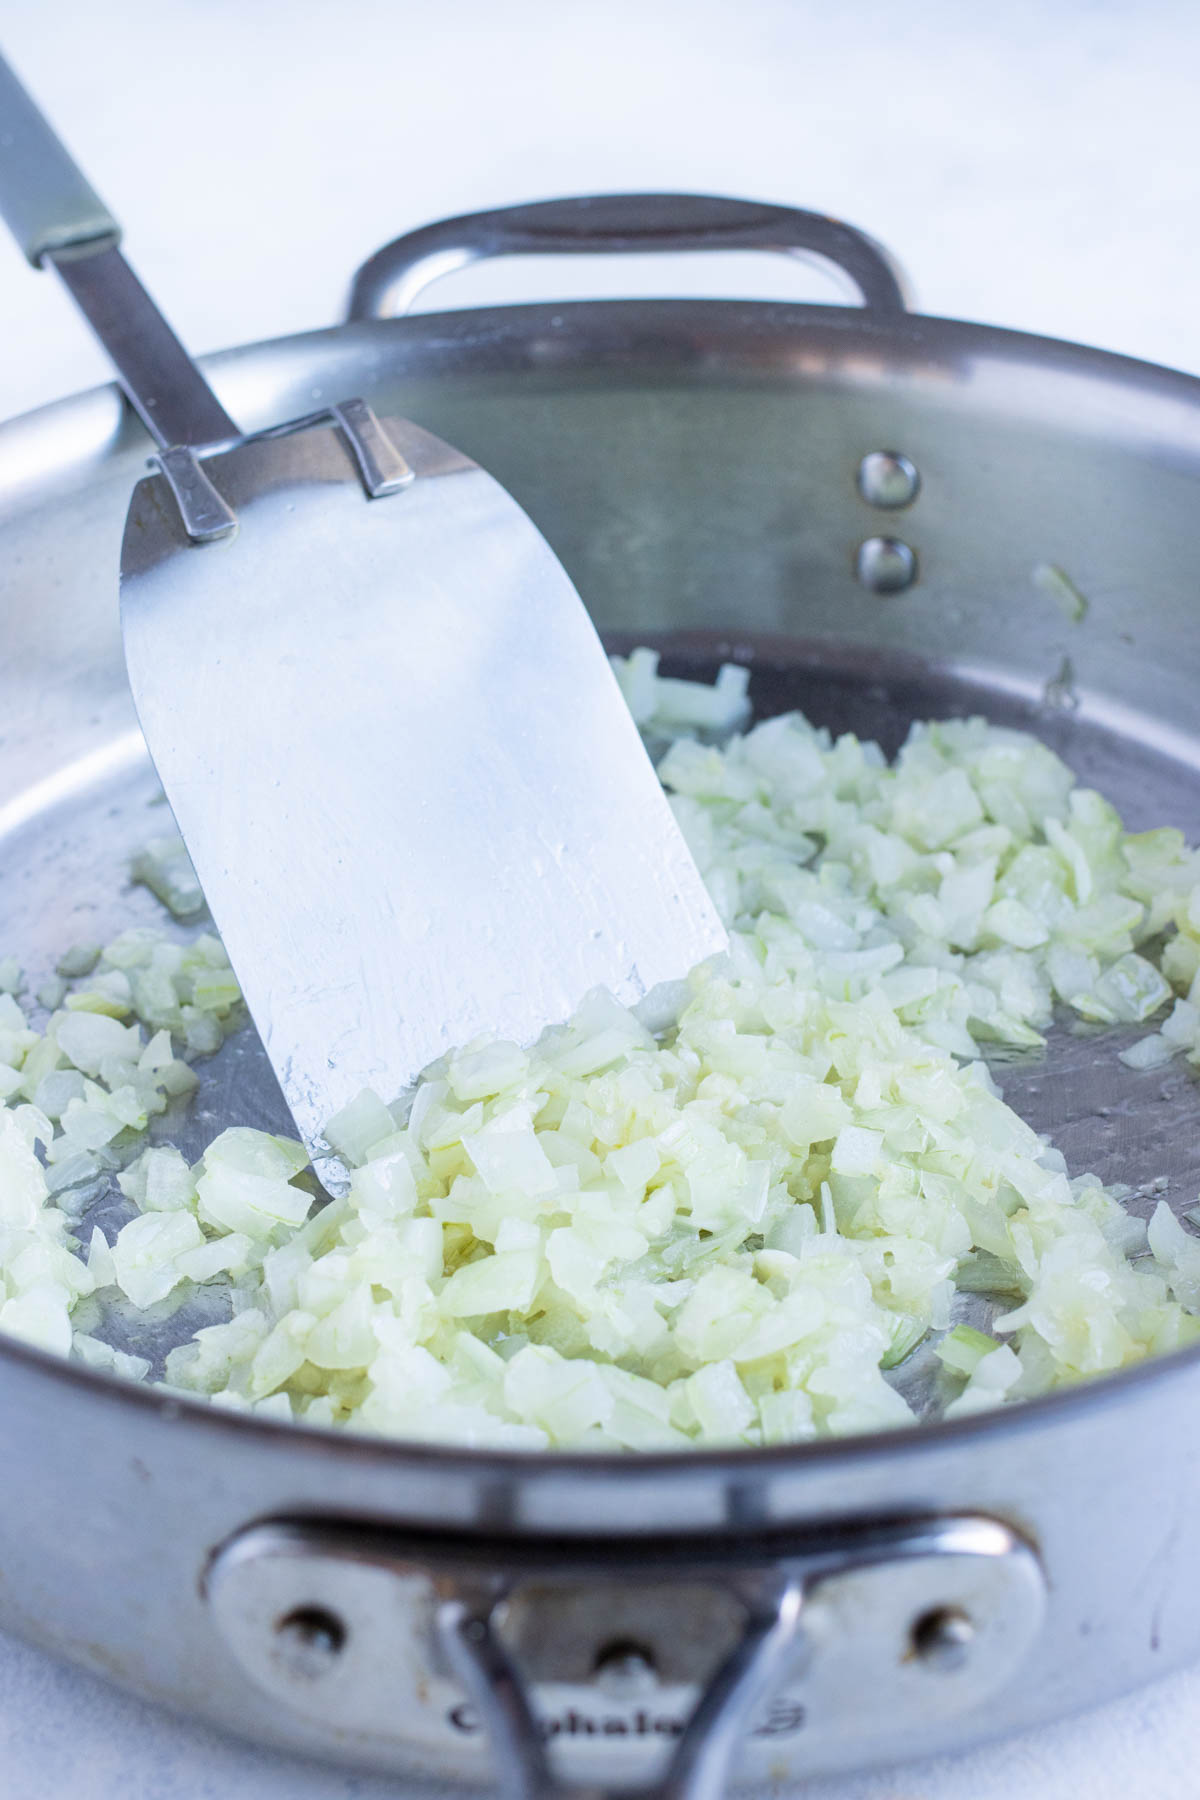 Diced onions are sautéed in a skillet.